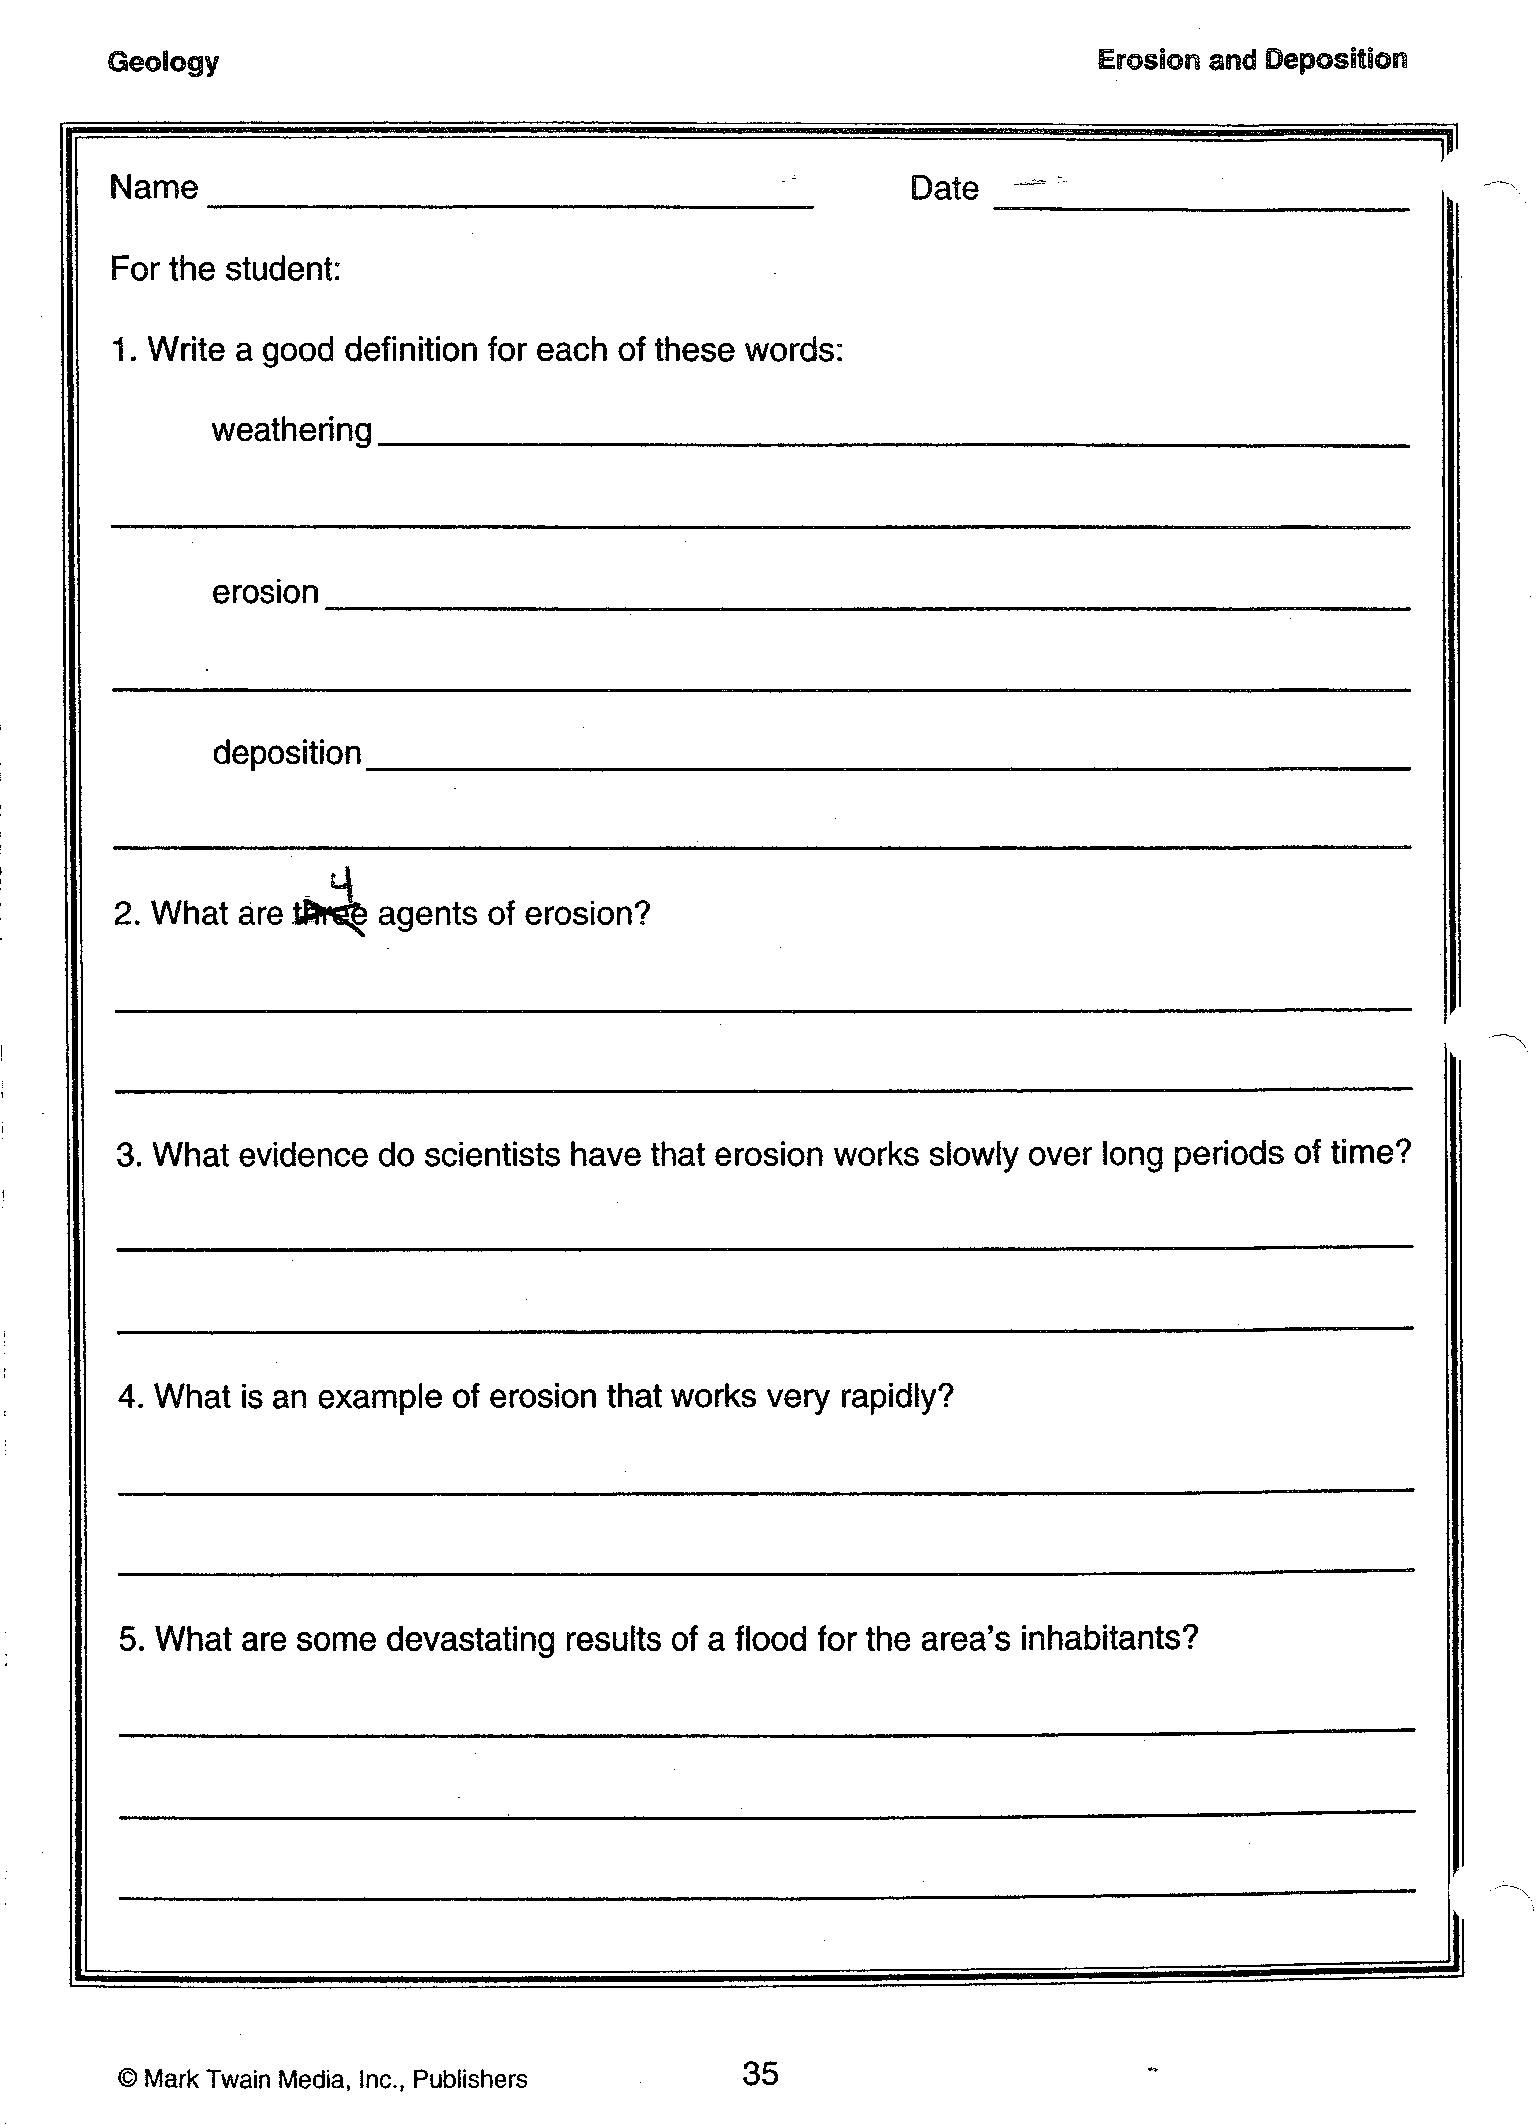 science worksheets for high school pdf